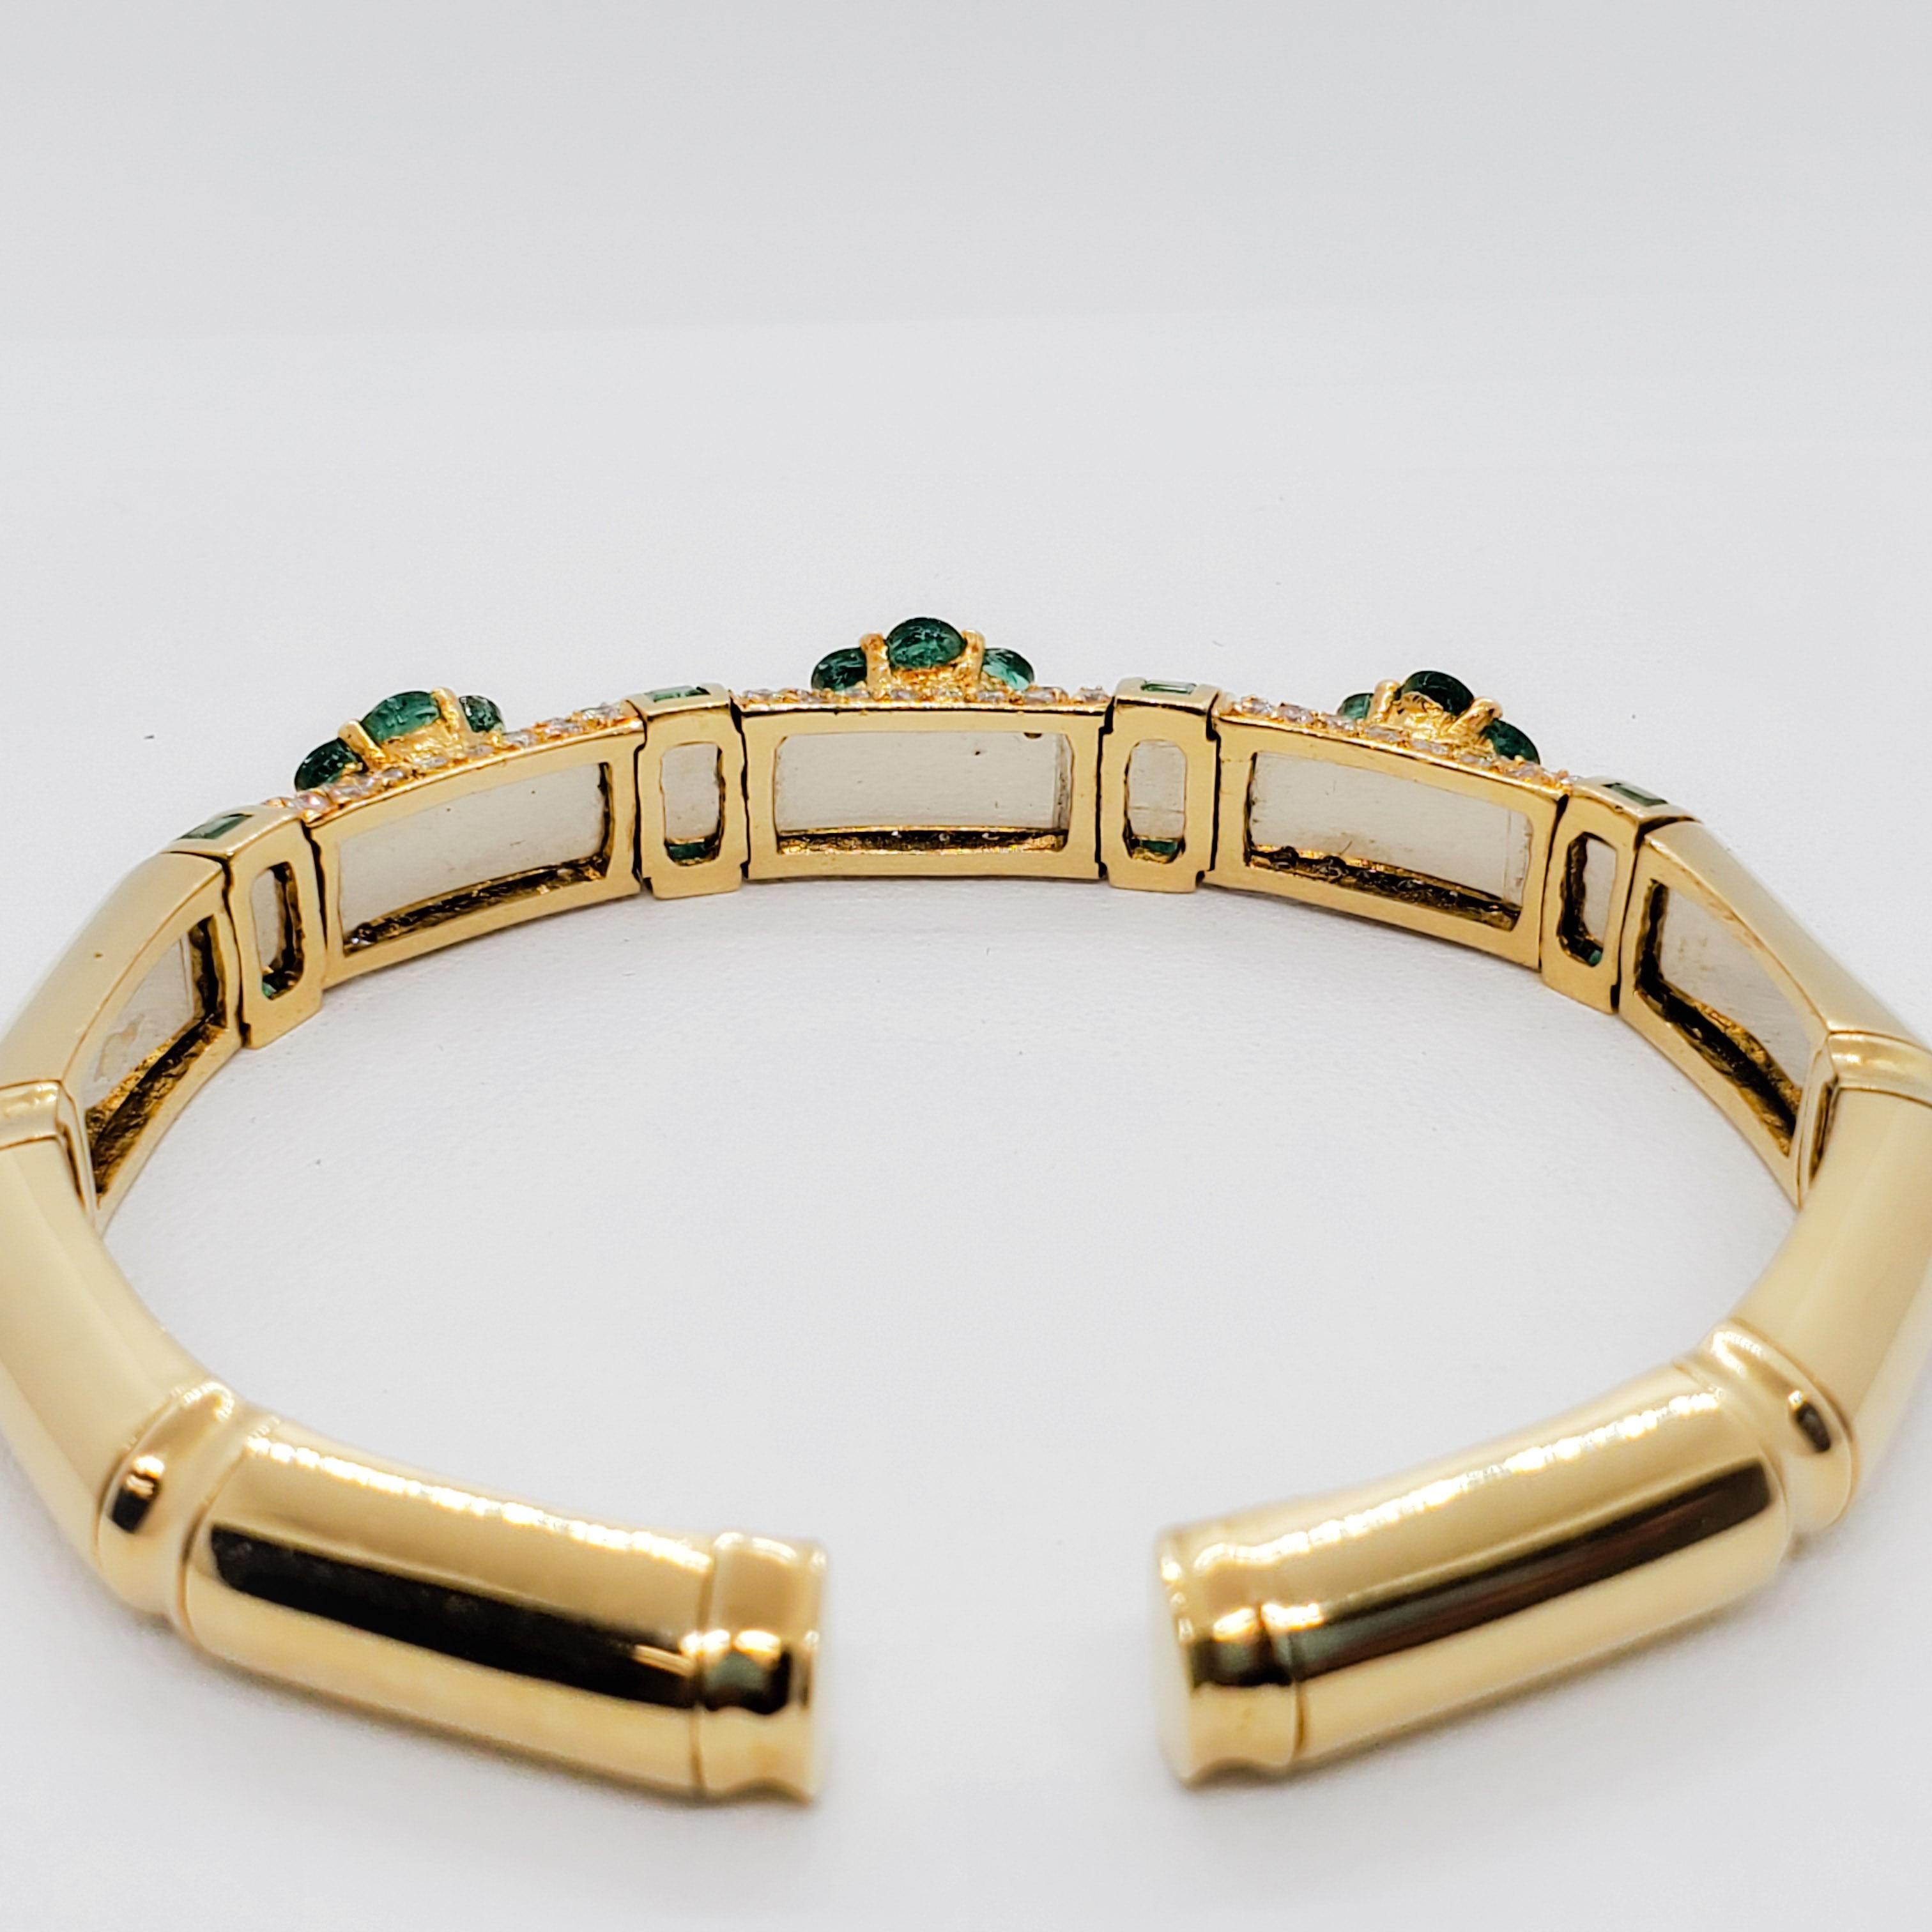 Stunning estate bangle showcasing deep green emeralds in multi shapes and 1.60 cts of good quality, white, and bright diamond rounds.  Handmade in 18k yellow gold.  Floral design is classic and evergreen.  This bangle is in excellent condition and